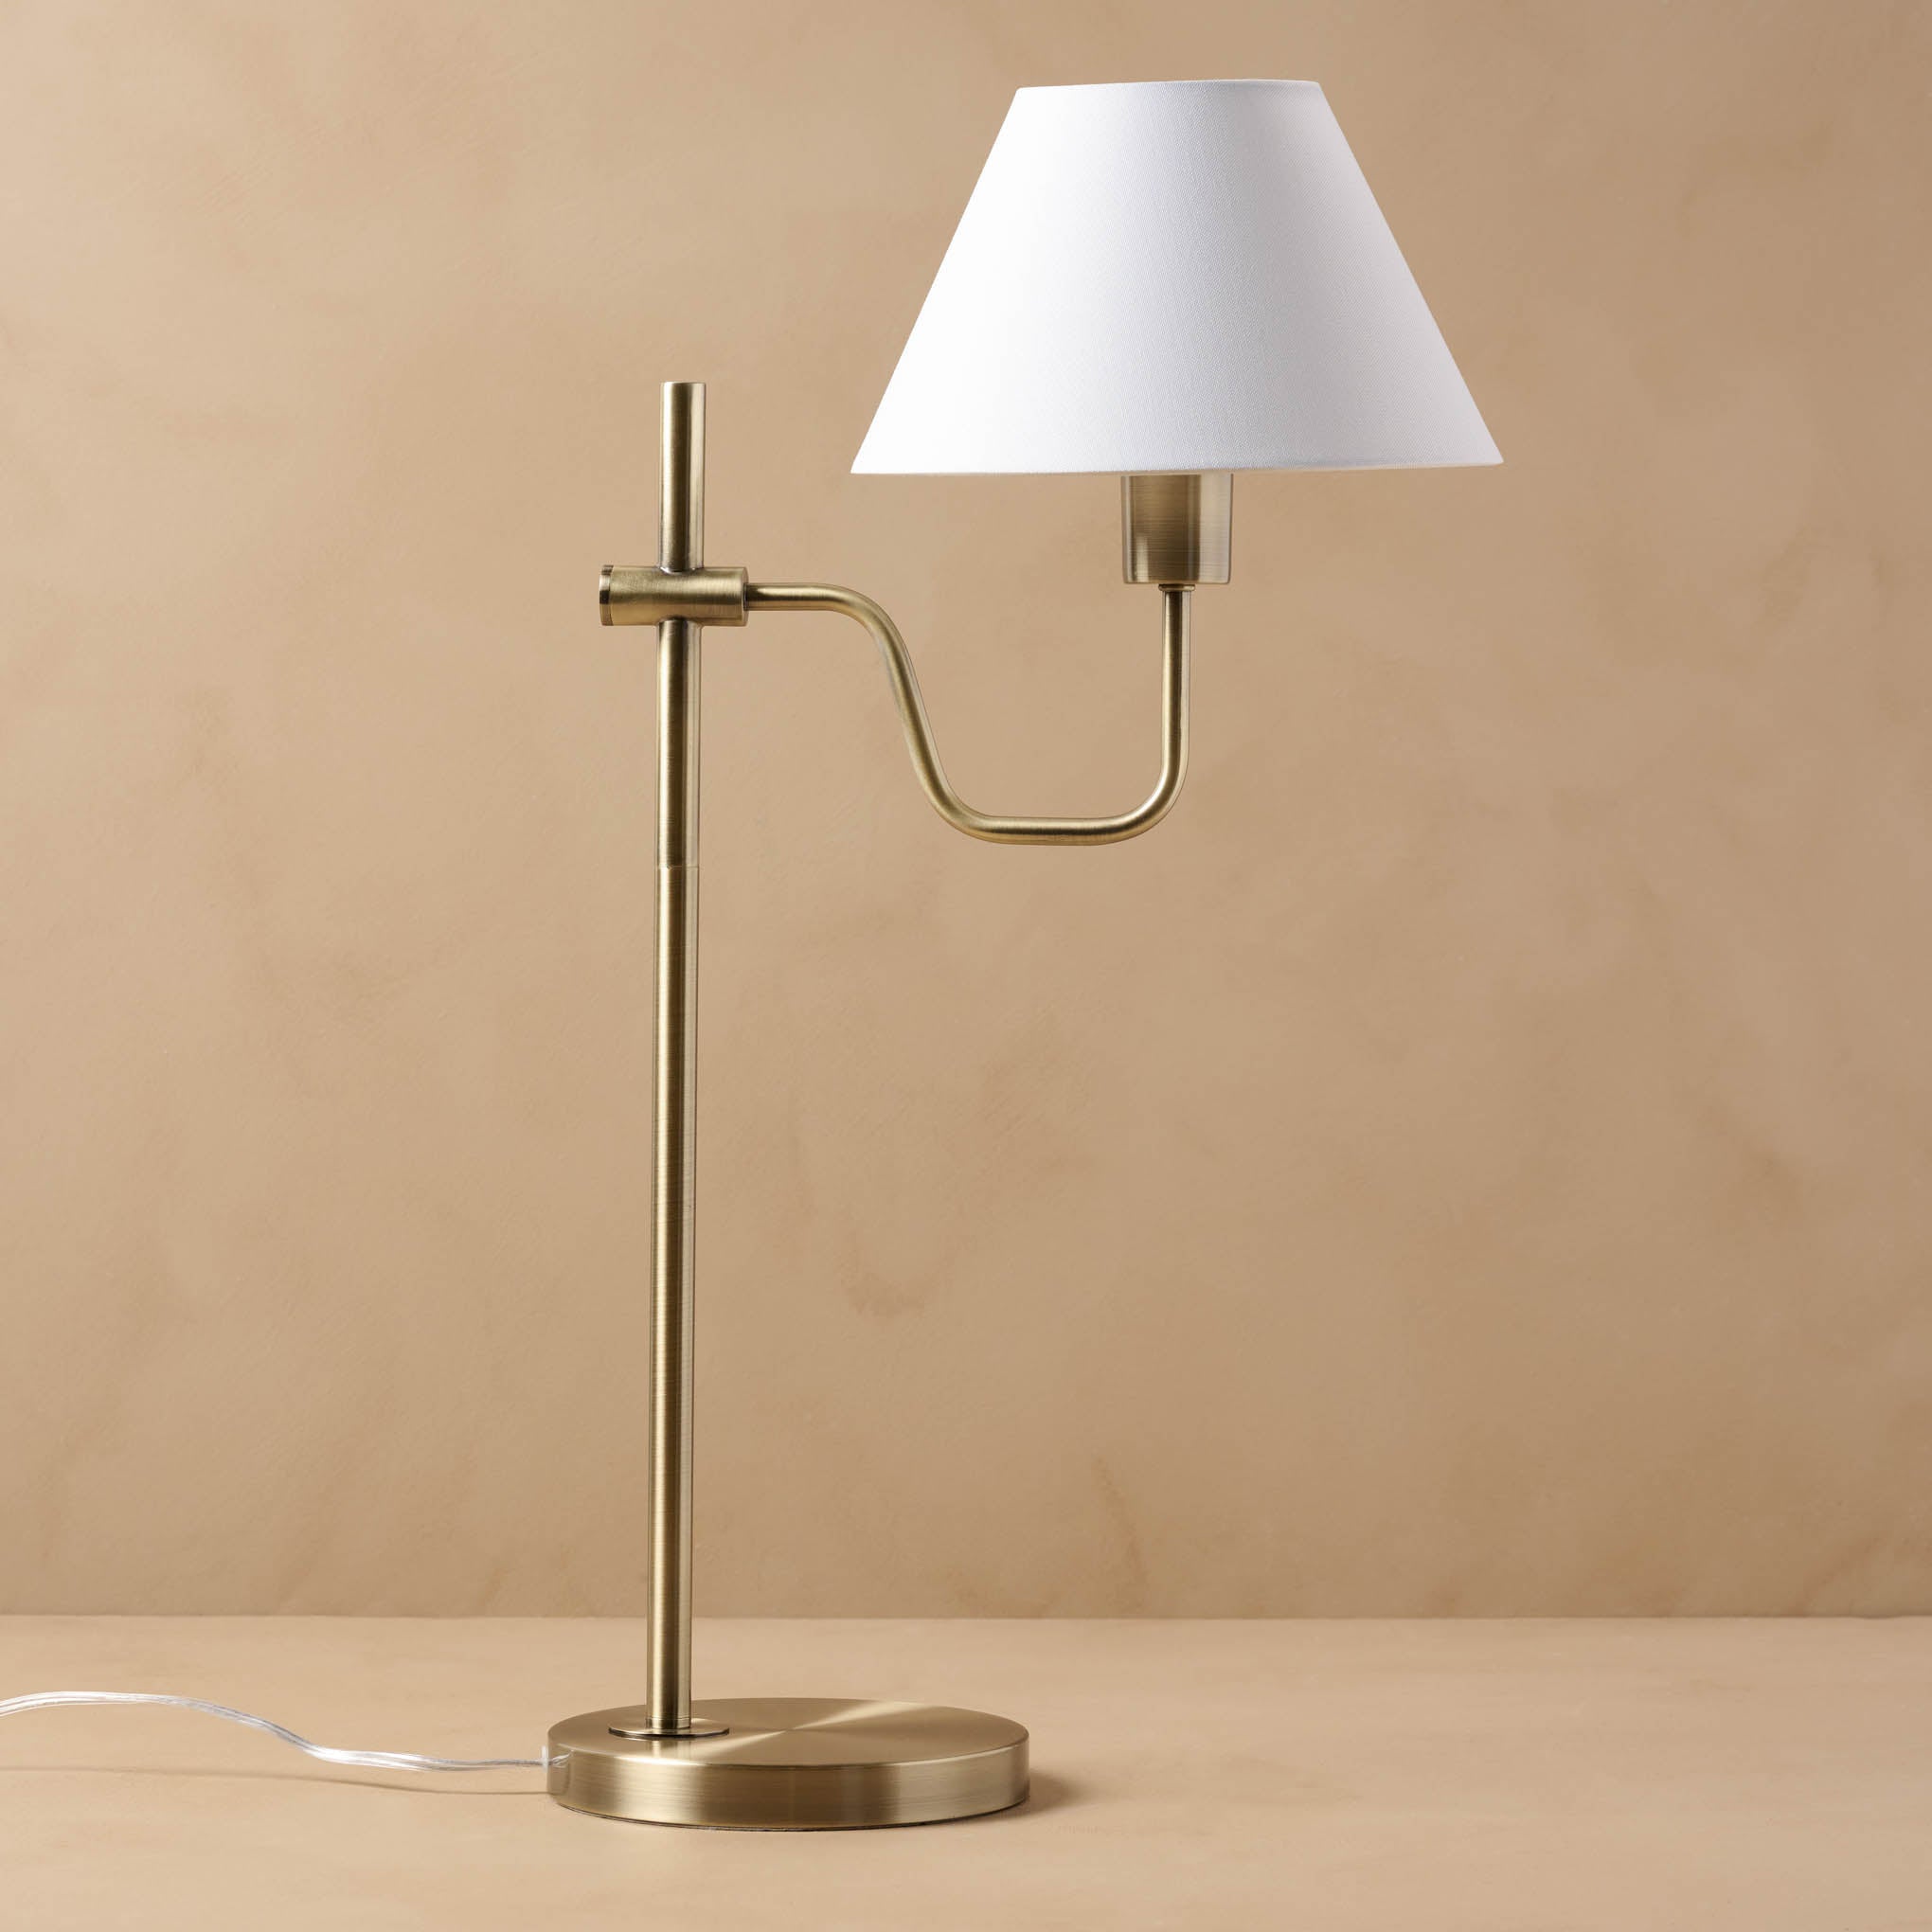 Maren Library Table Lamp $118.00